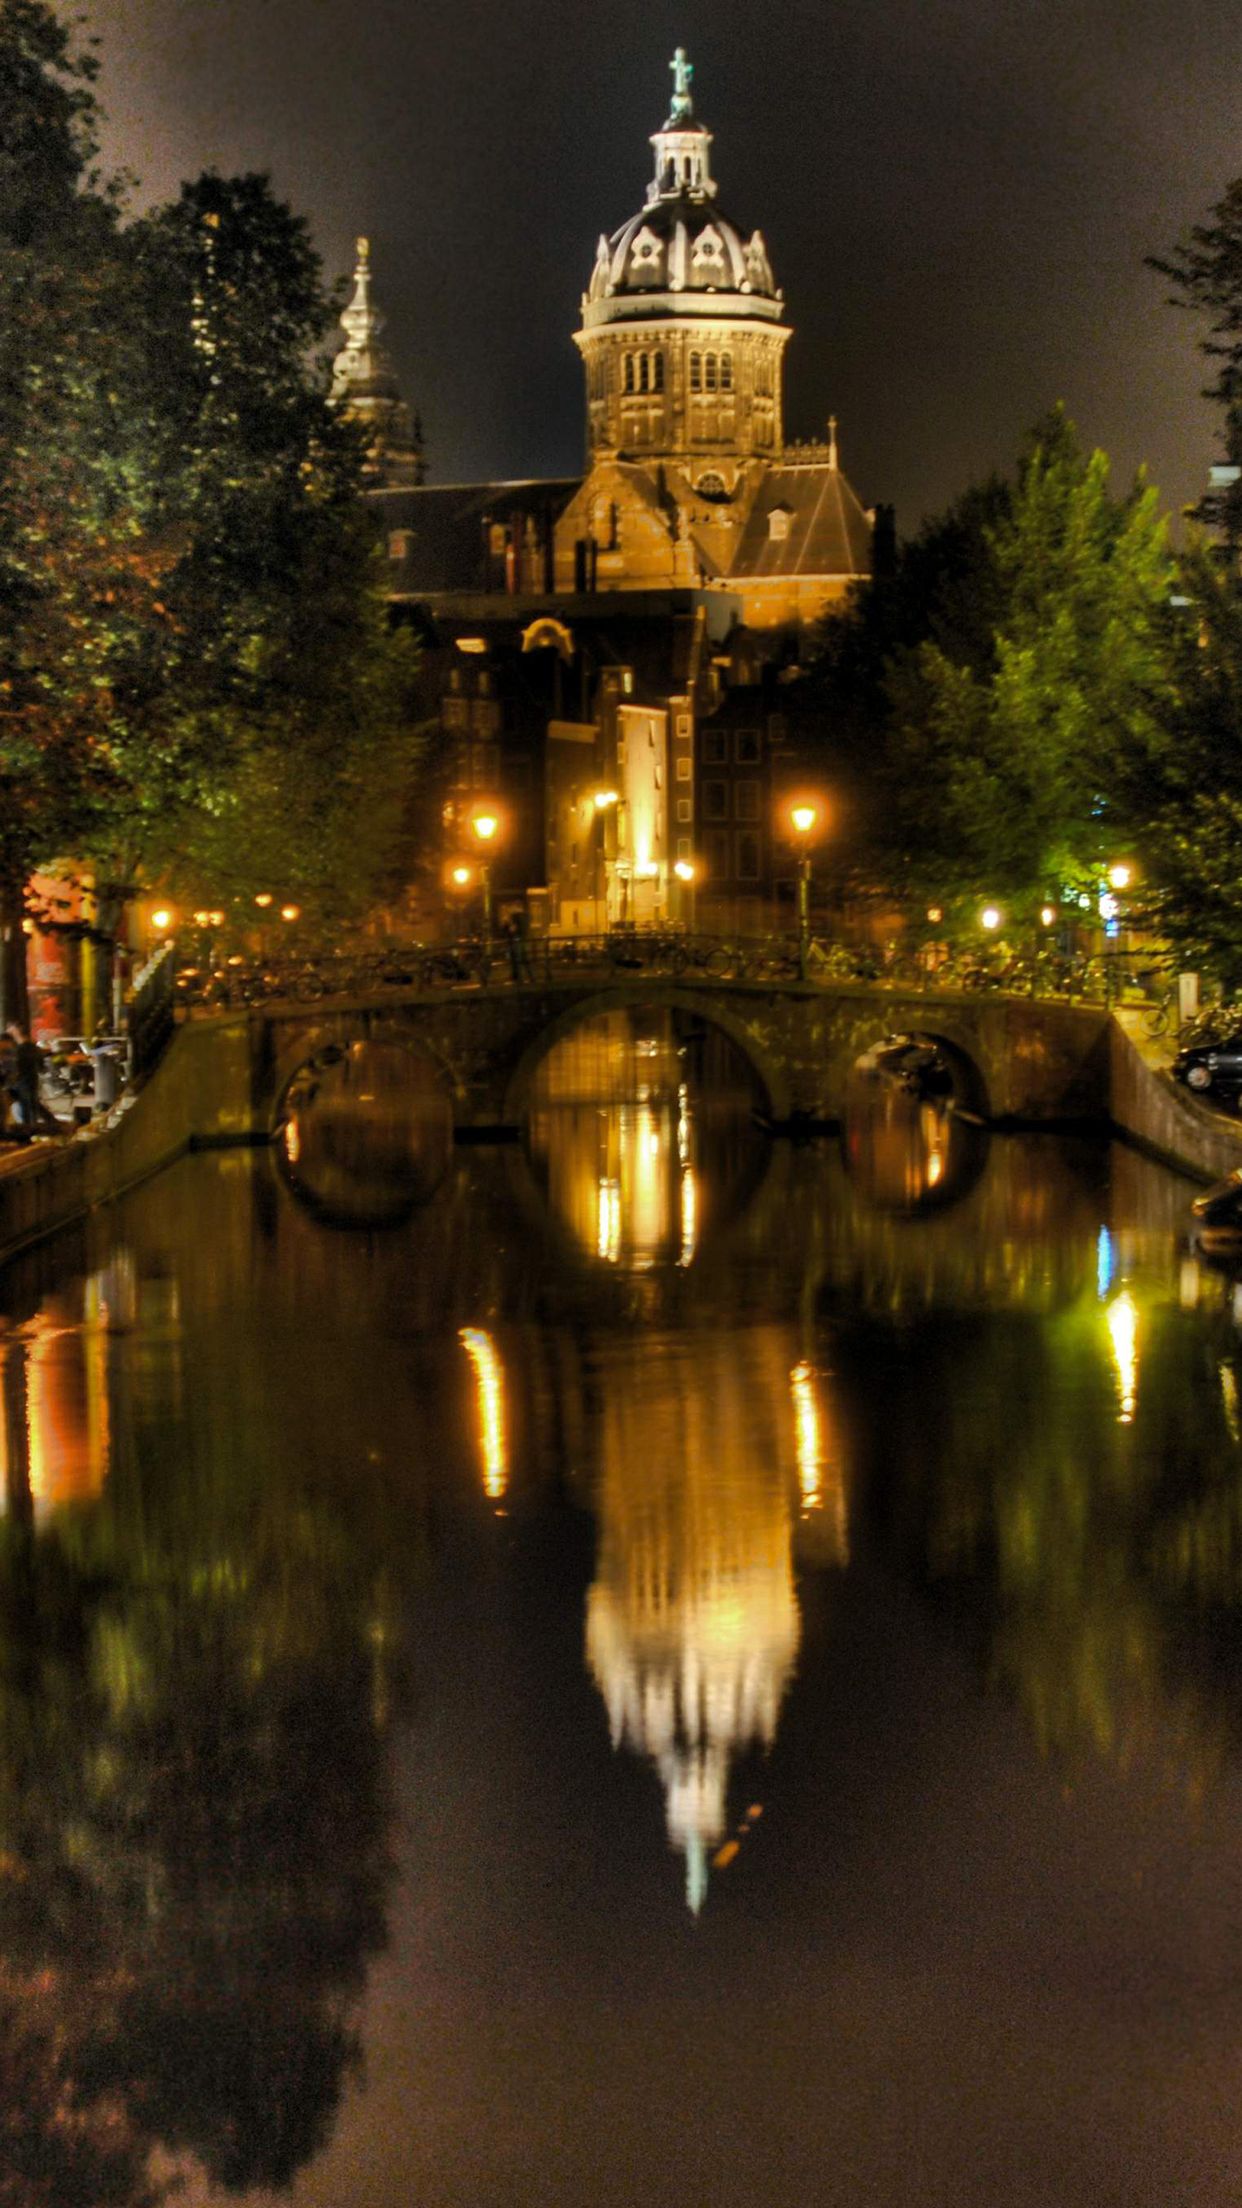 Amsterdam Night Wallpaper for iPhone Pro Max, X, 6